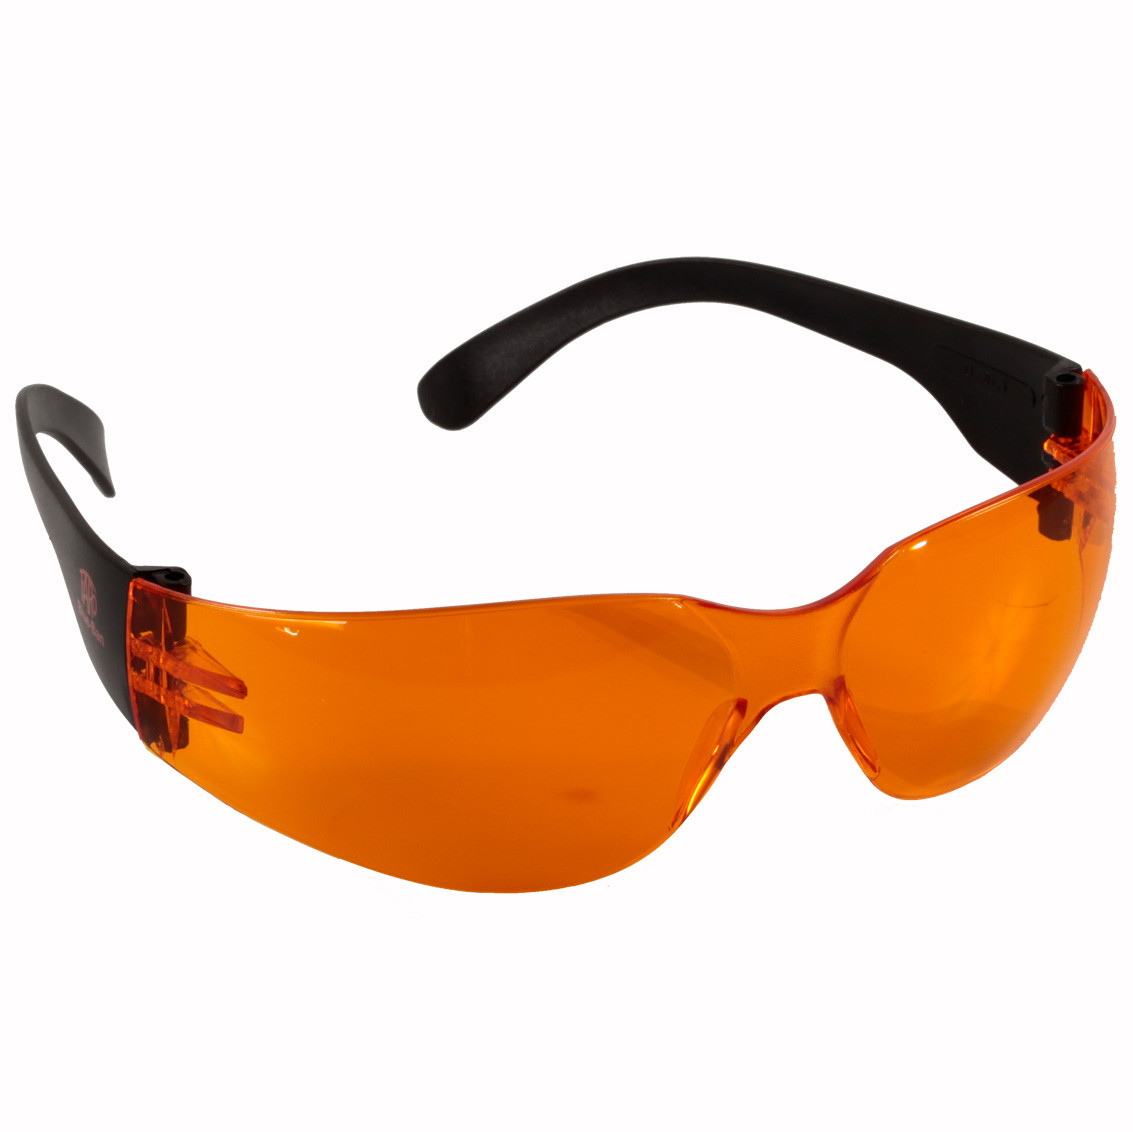 Polycarbonate protective goggles for UV rays